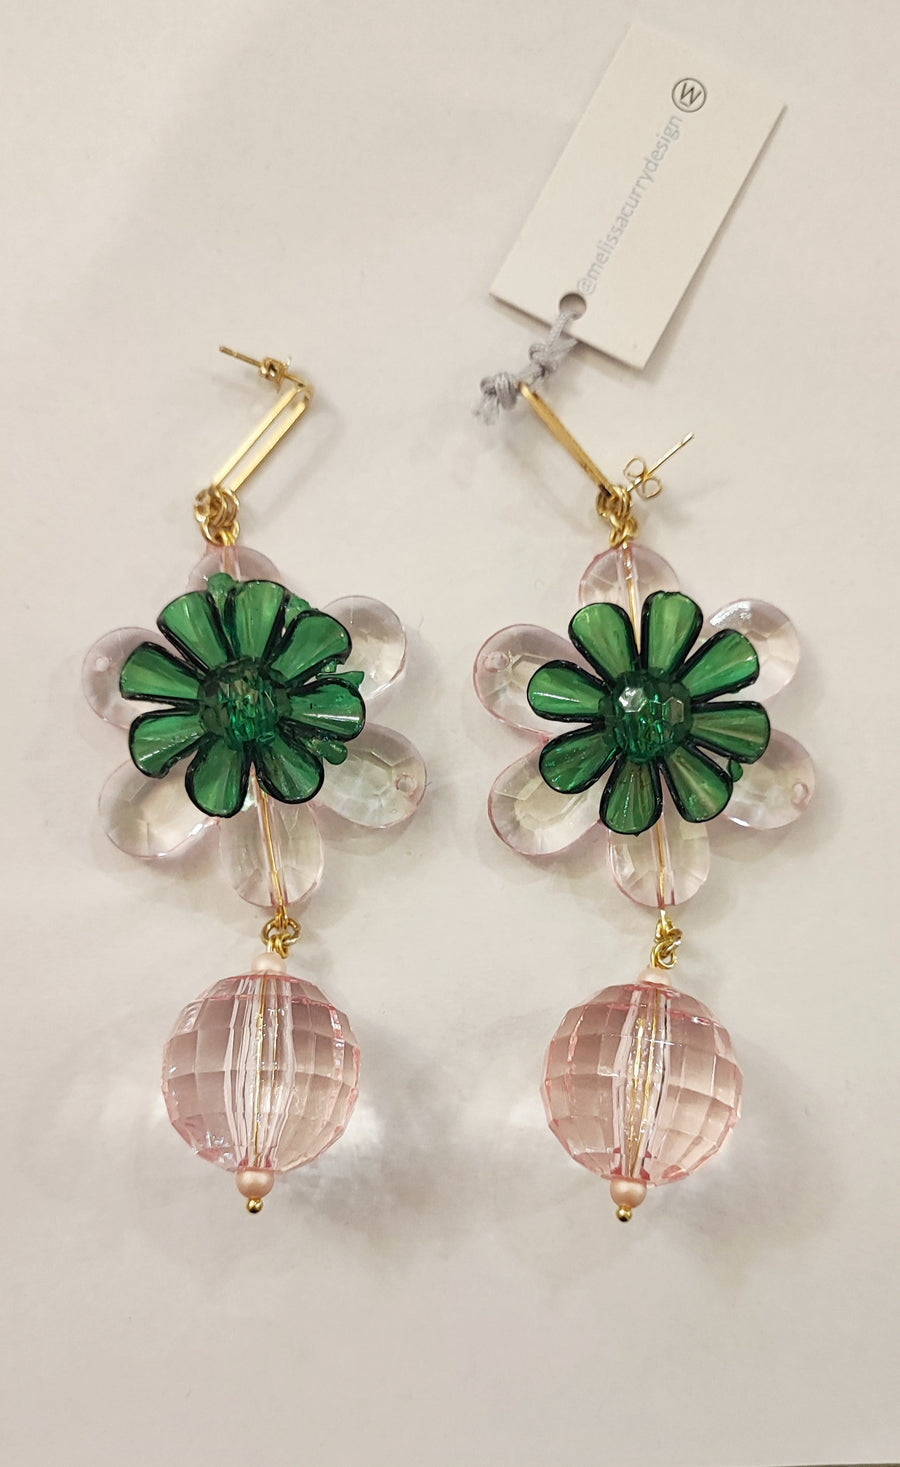 MELISSA CURRY FLEURS CITRUS EARRINGS IN ROSE AND GREEN